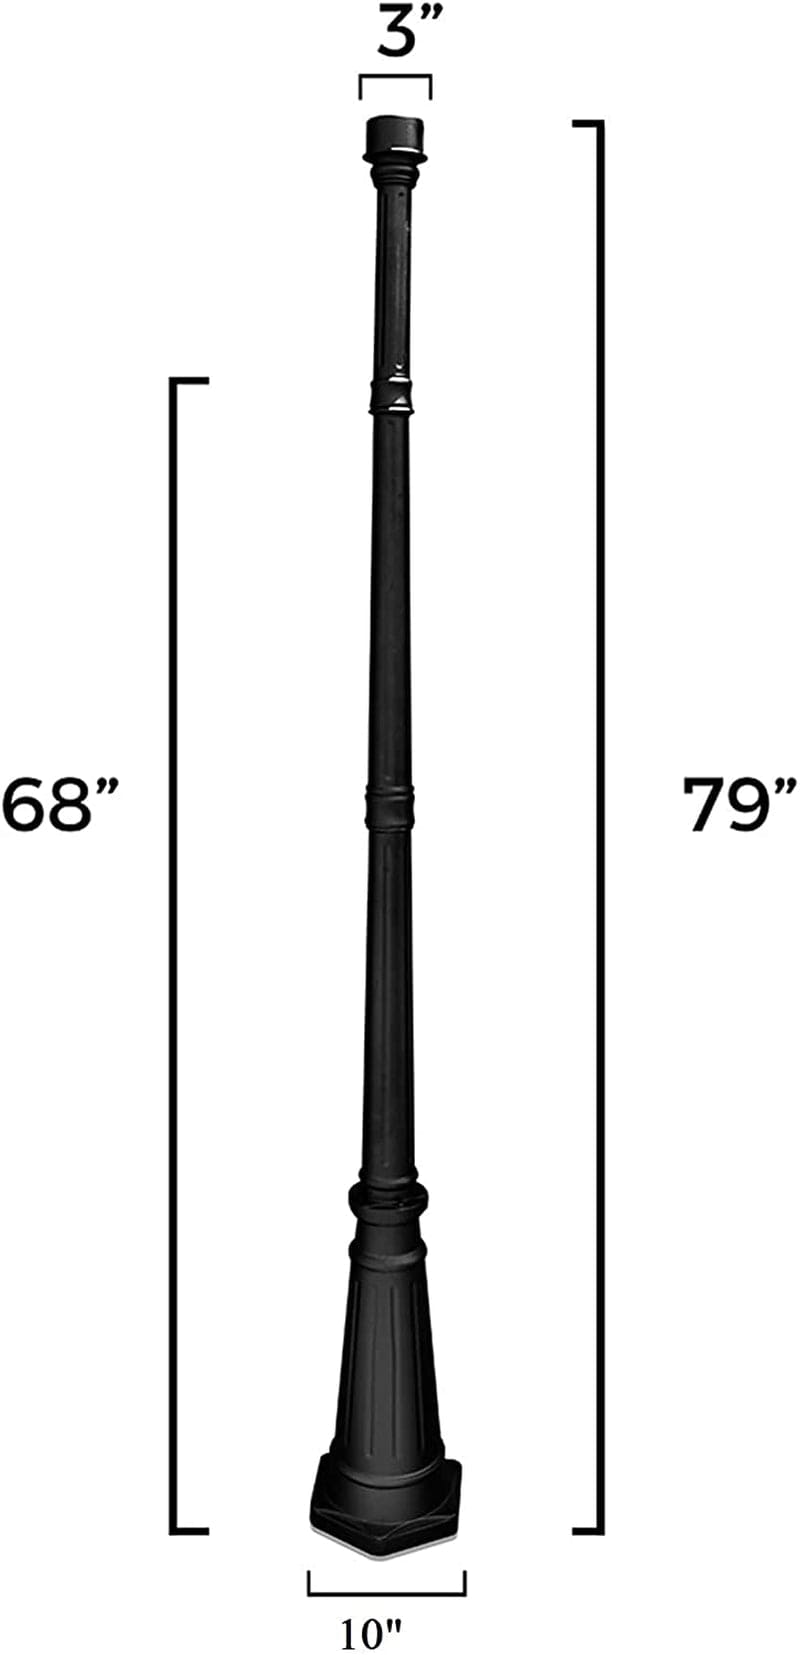 Gama Sonic Decorative Outdoor Lamp Post for Solar Lights, Black Cast Aluminum, 3" Fitter Mount, 6.5' Tall, GS-DP55F-BLK